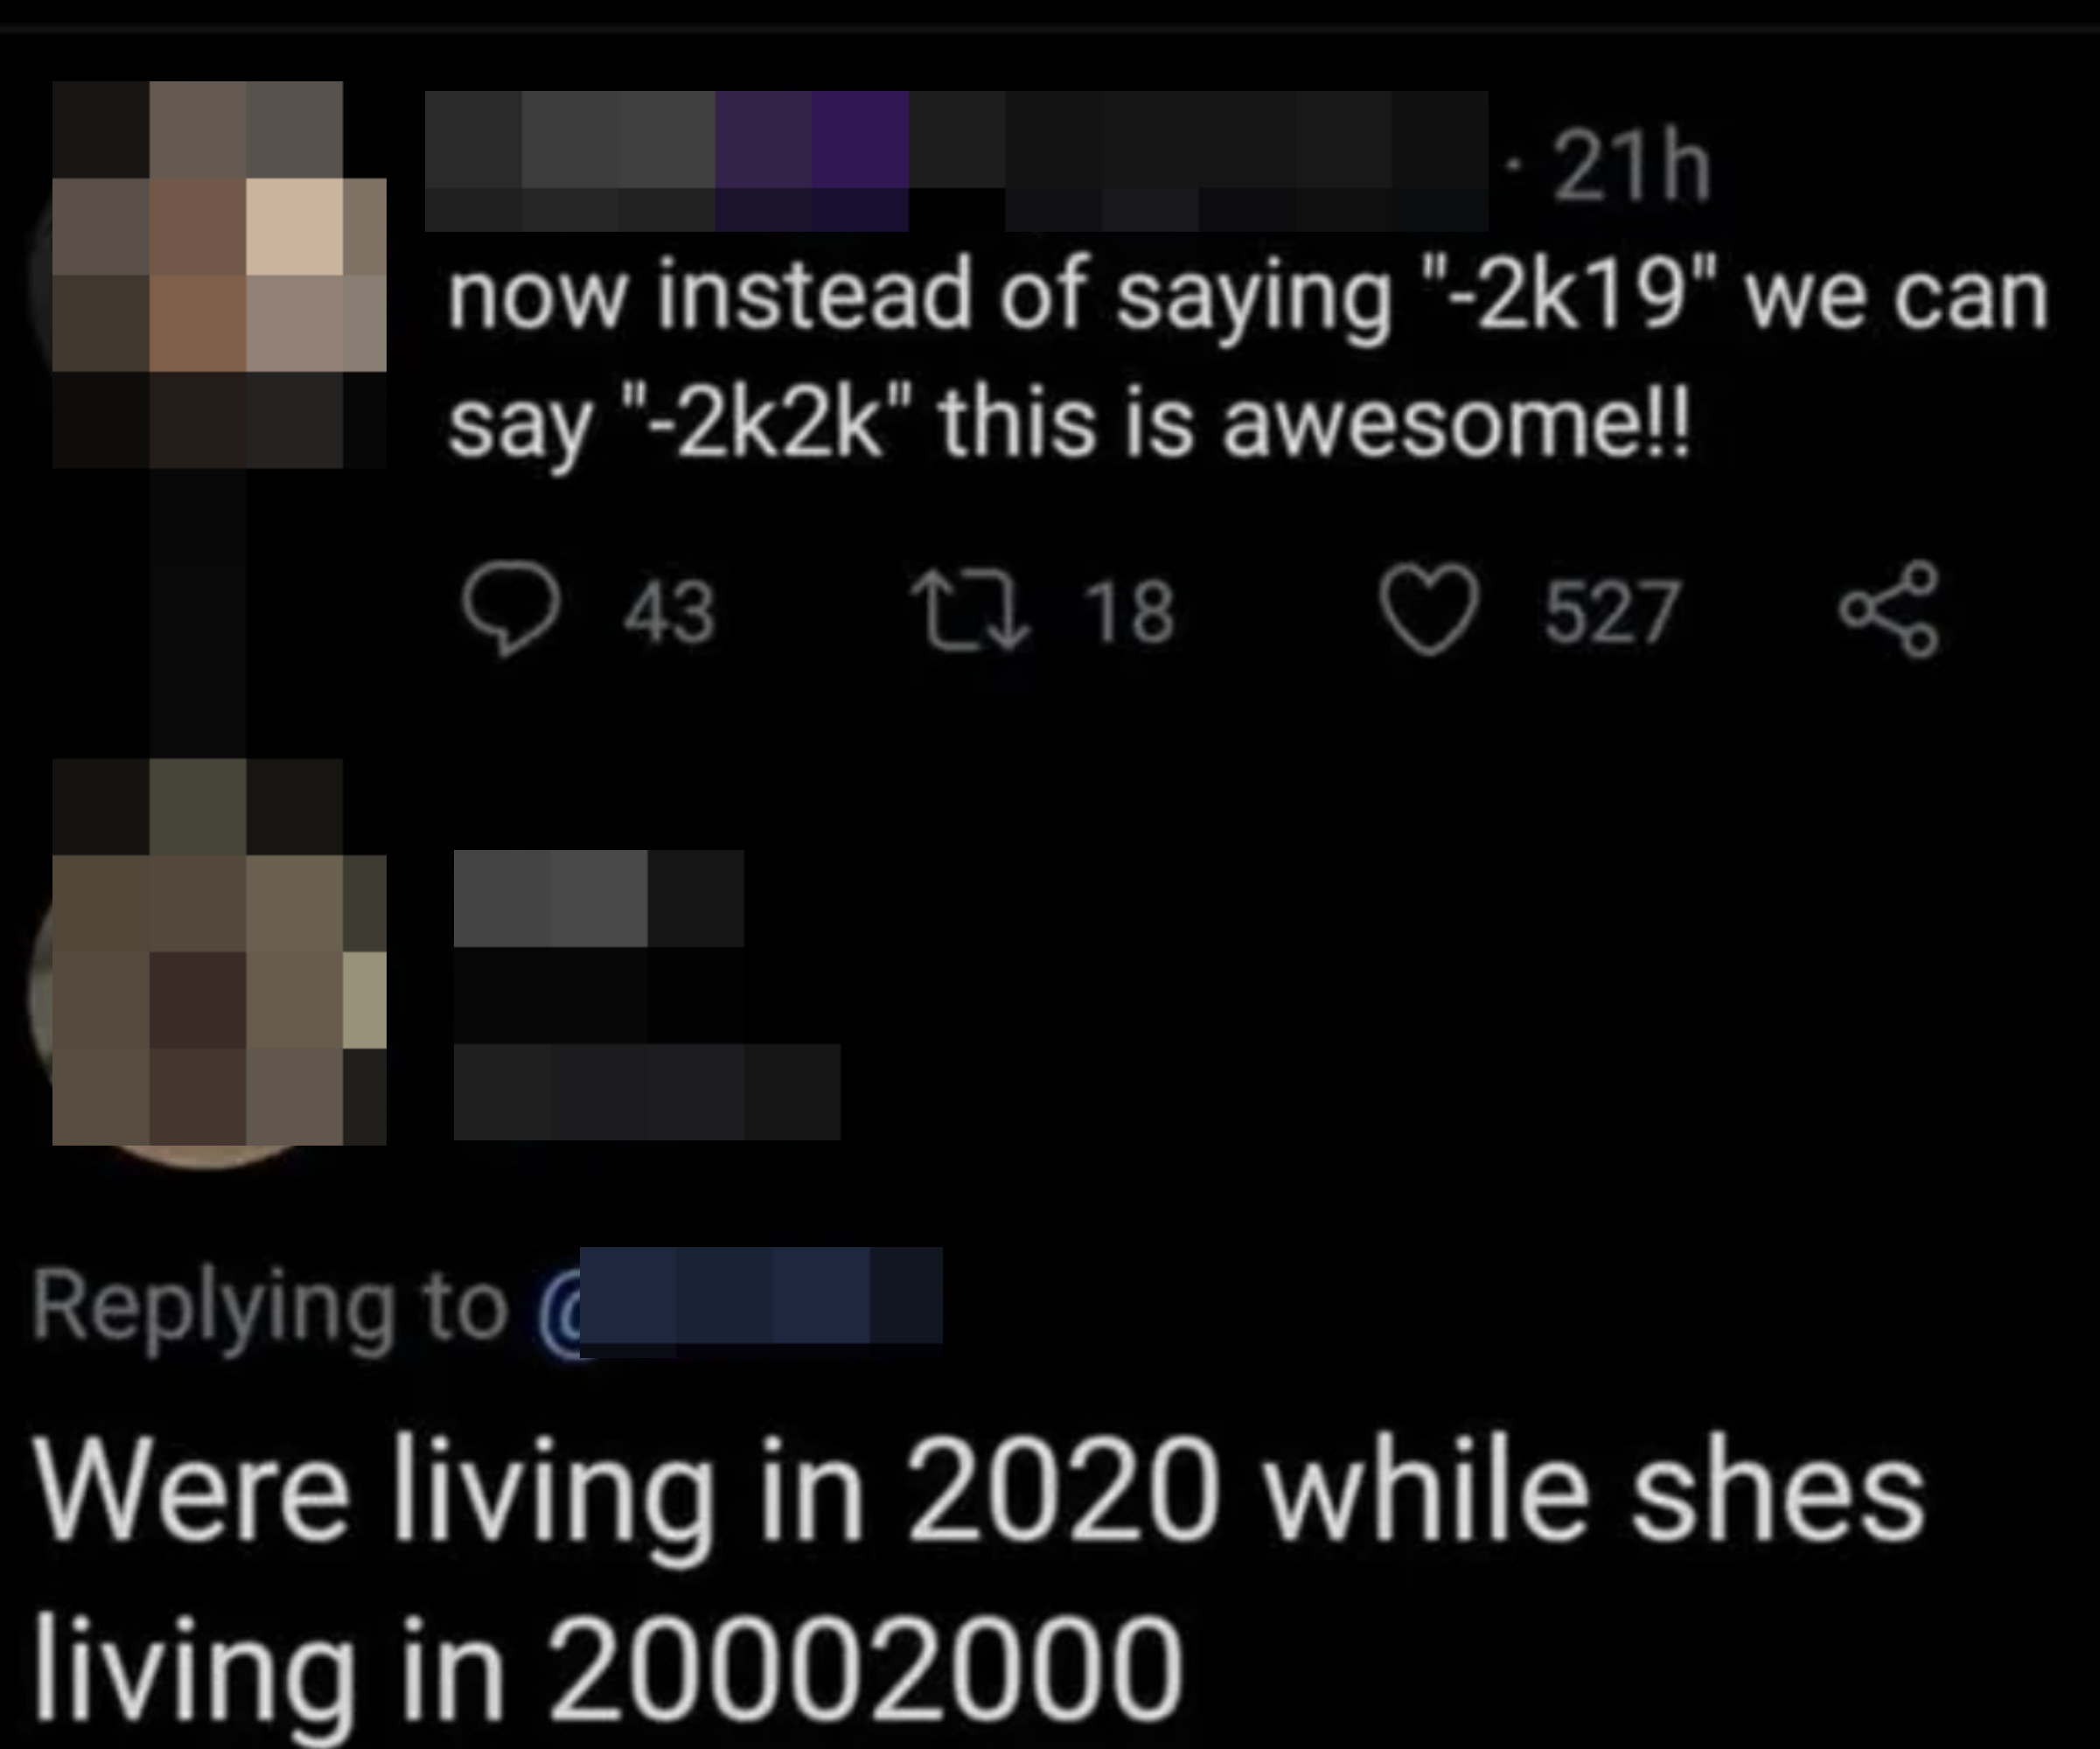 &quot;Were living in 2020 while she&#x27;s living in 20002000&quot;